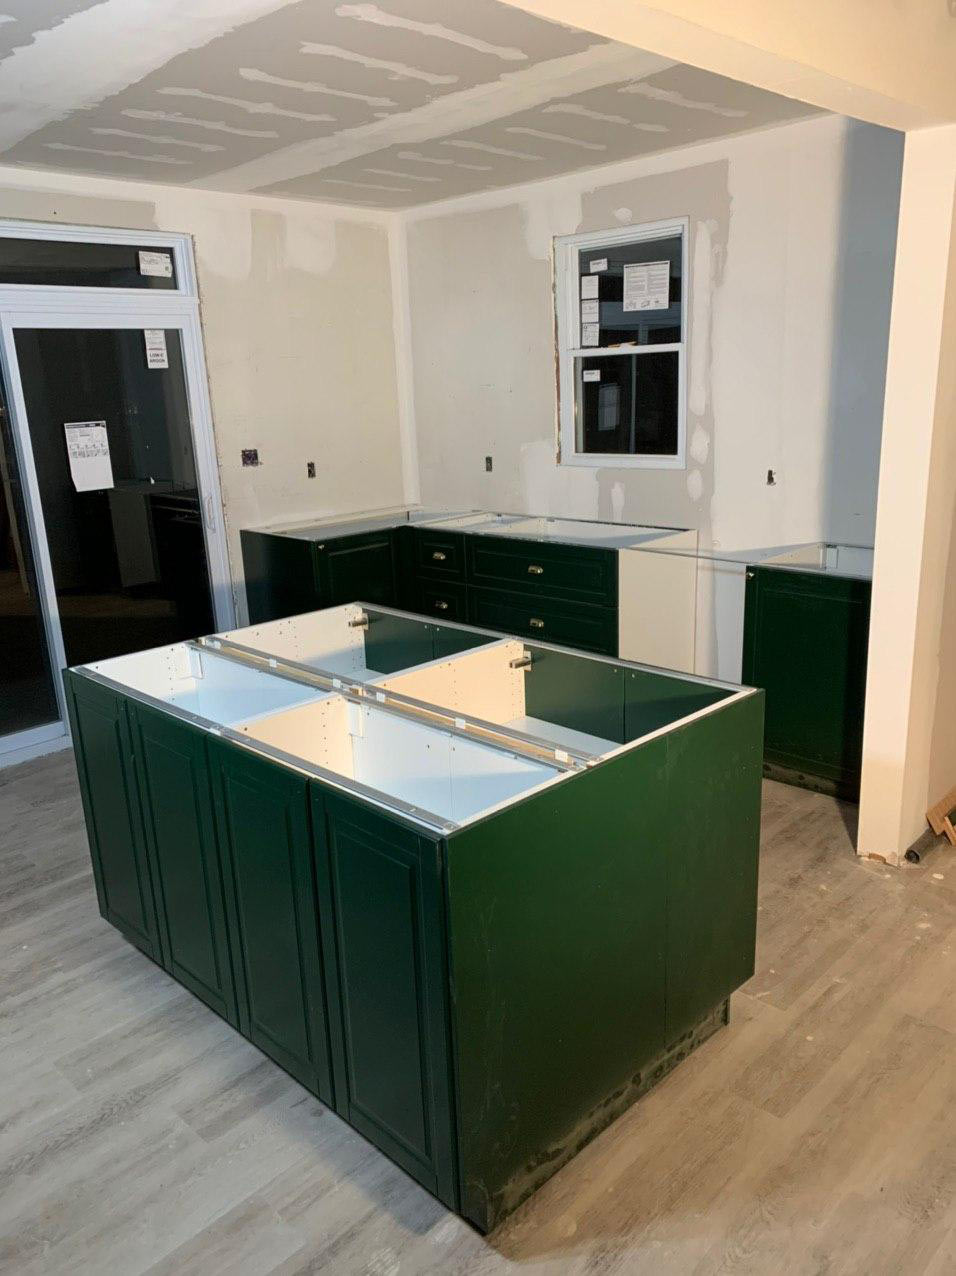 Two parallel wall IKEA kitchen 10ft long with 5ft island and BODBYN green IKEA doors style,